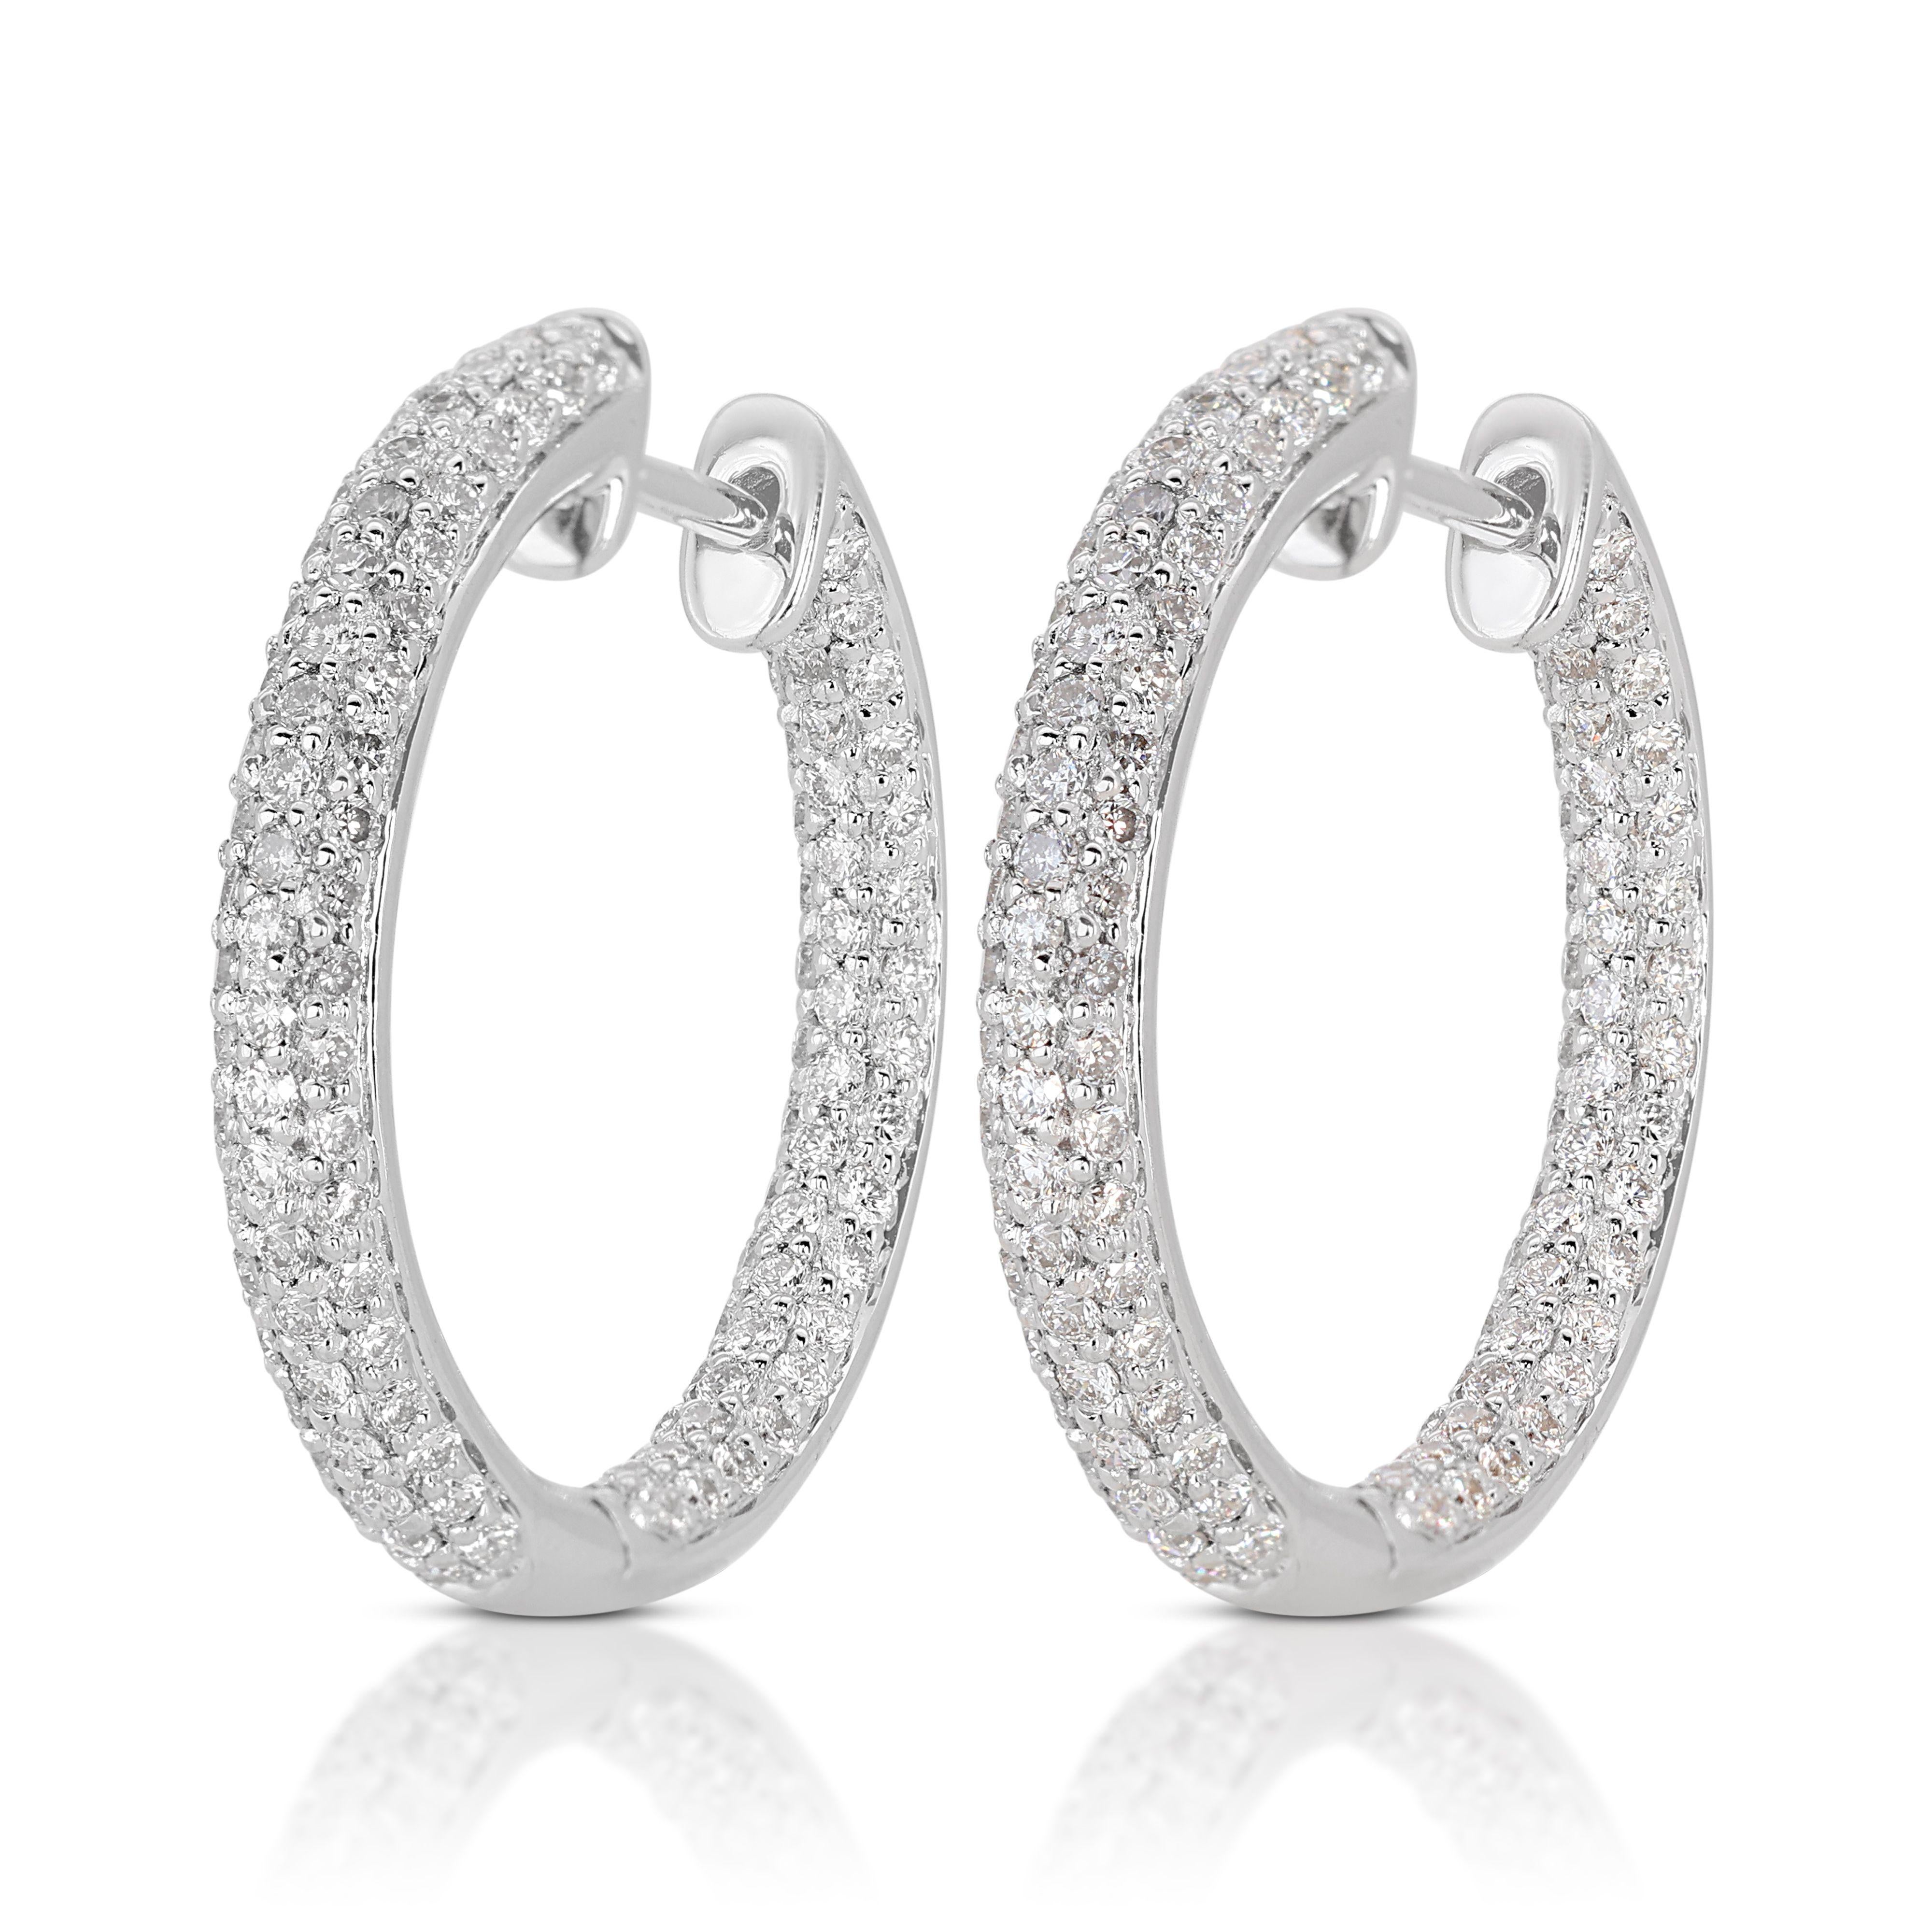 Exquisite 1.15ct Hoop Diamond Earrings set in 18K White Gold In New Condition For Sale In רמת גן, IL